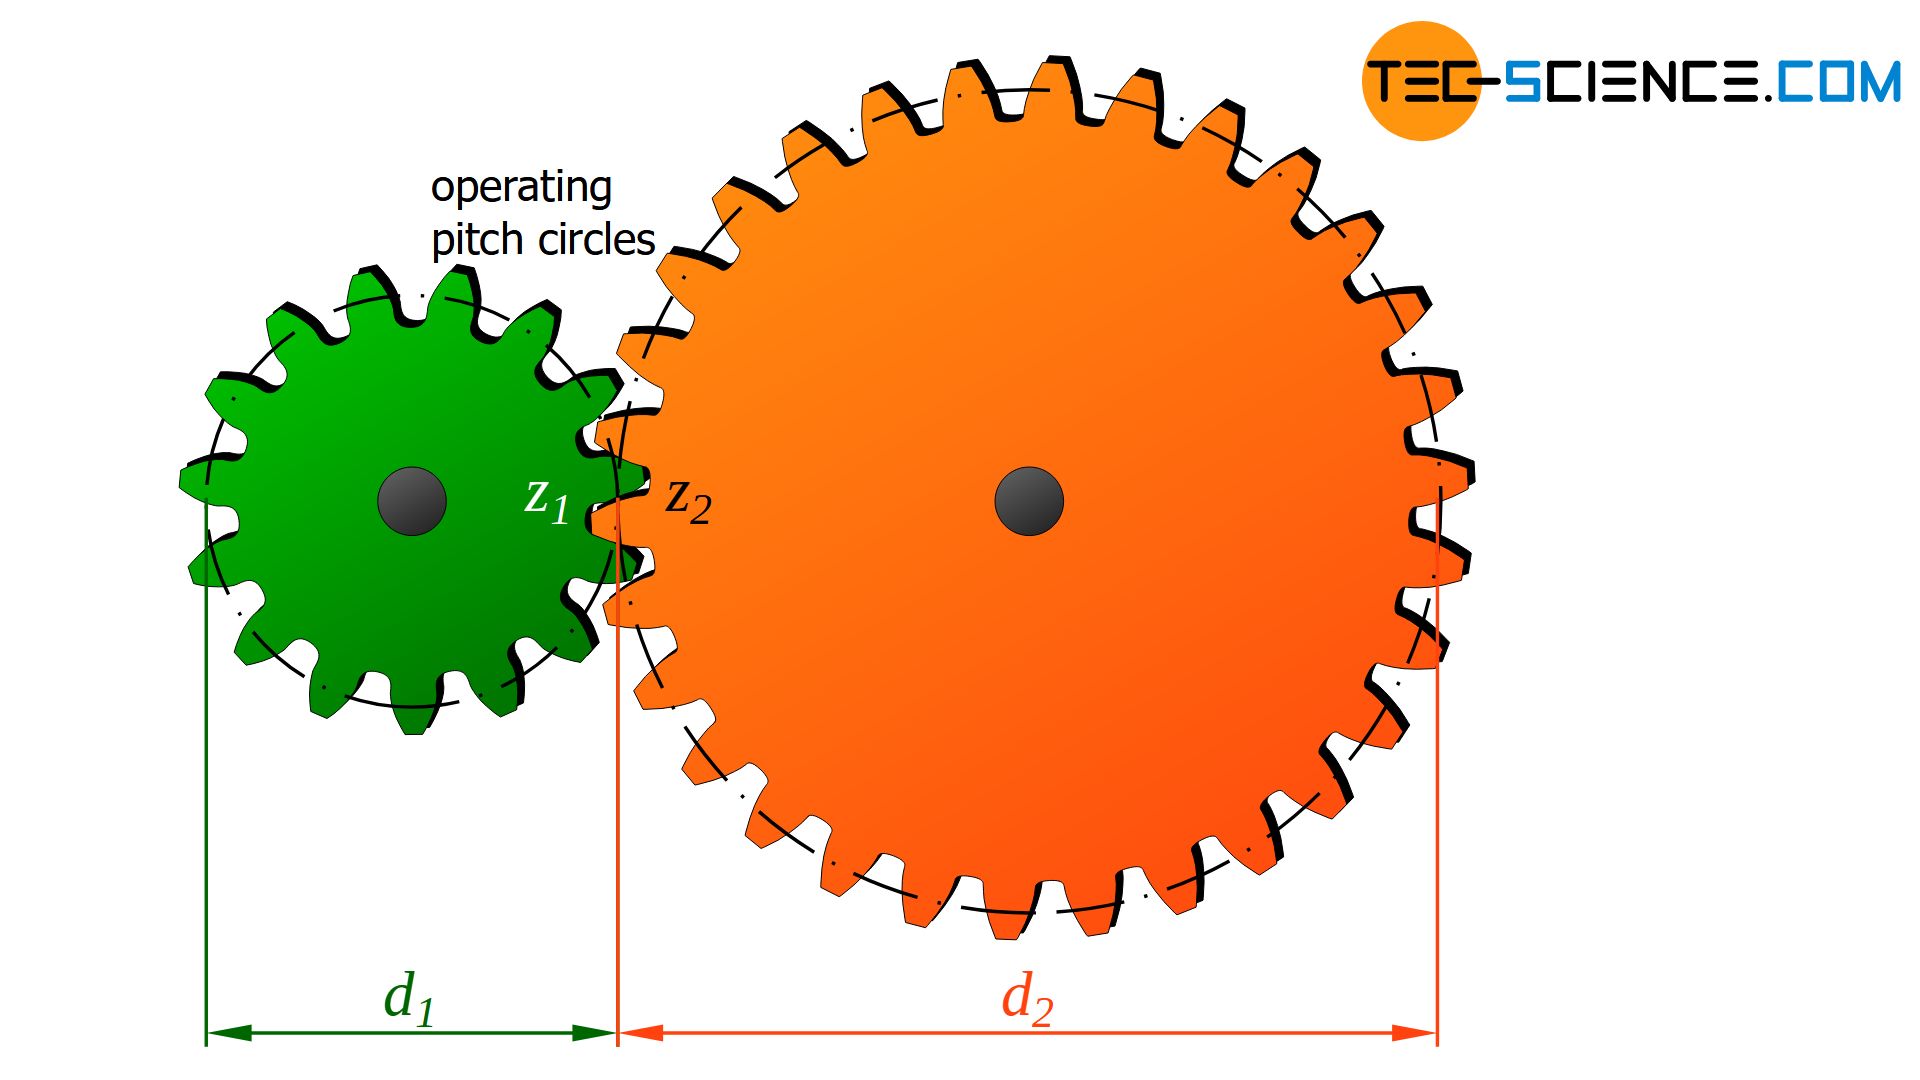 Planetary Gears: Principles Of Operation